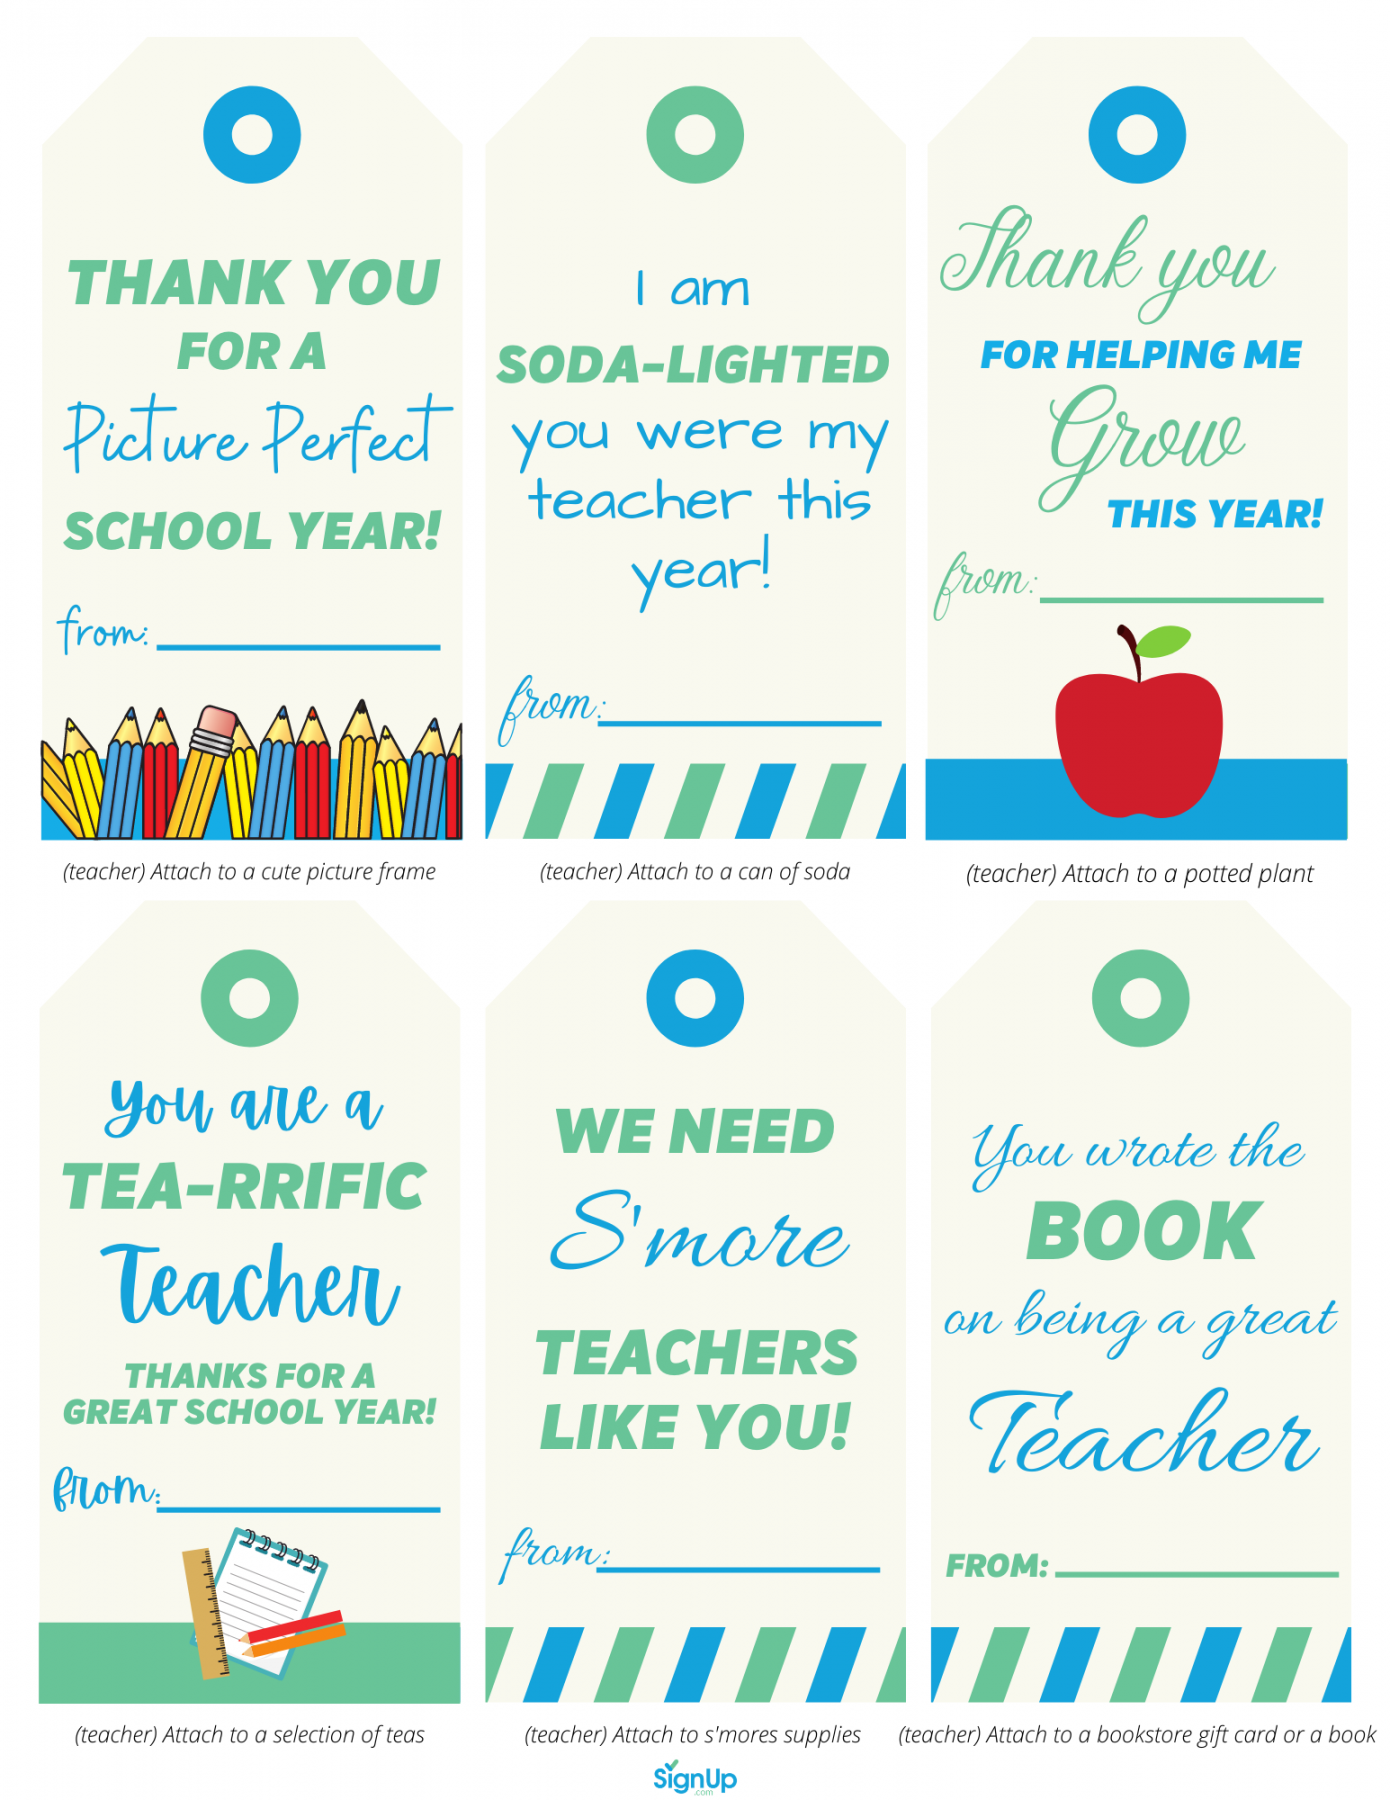 End of Year Thank You Printables  SignUp - Free Printable Thank You Cards For Teachers